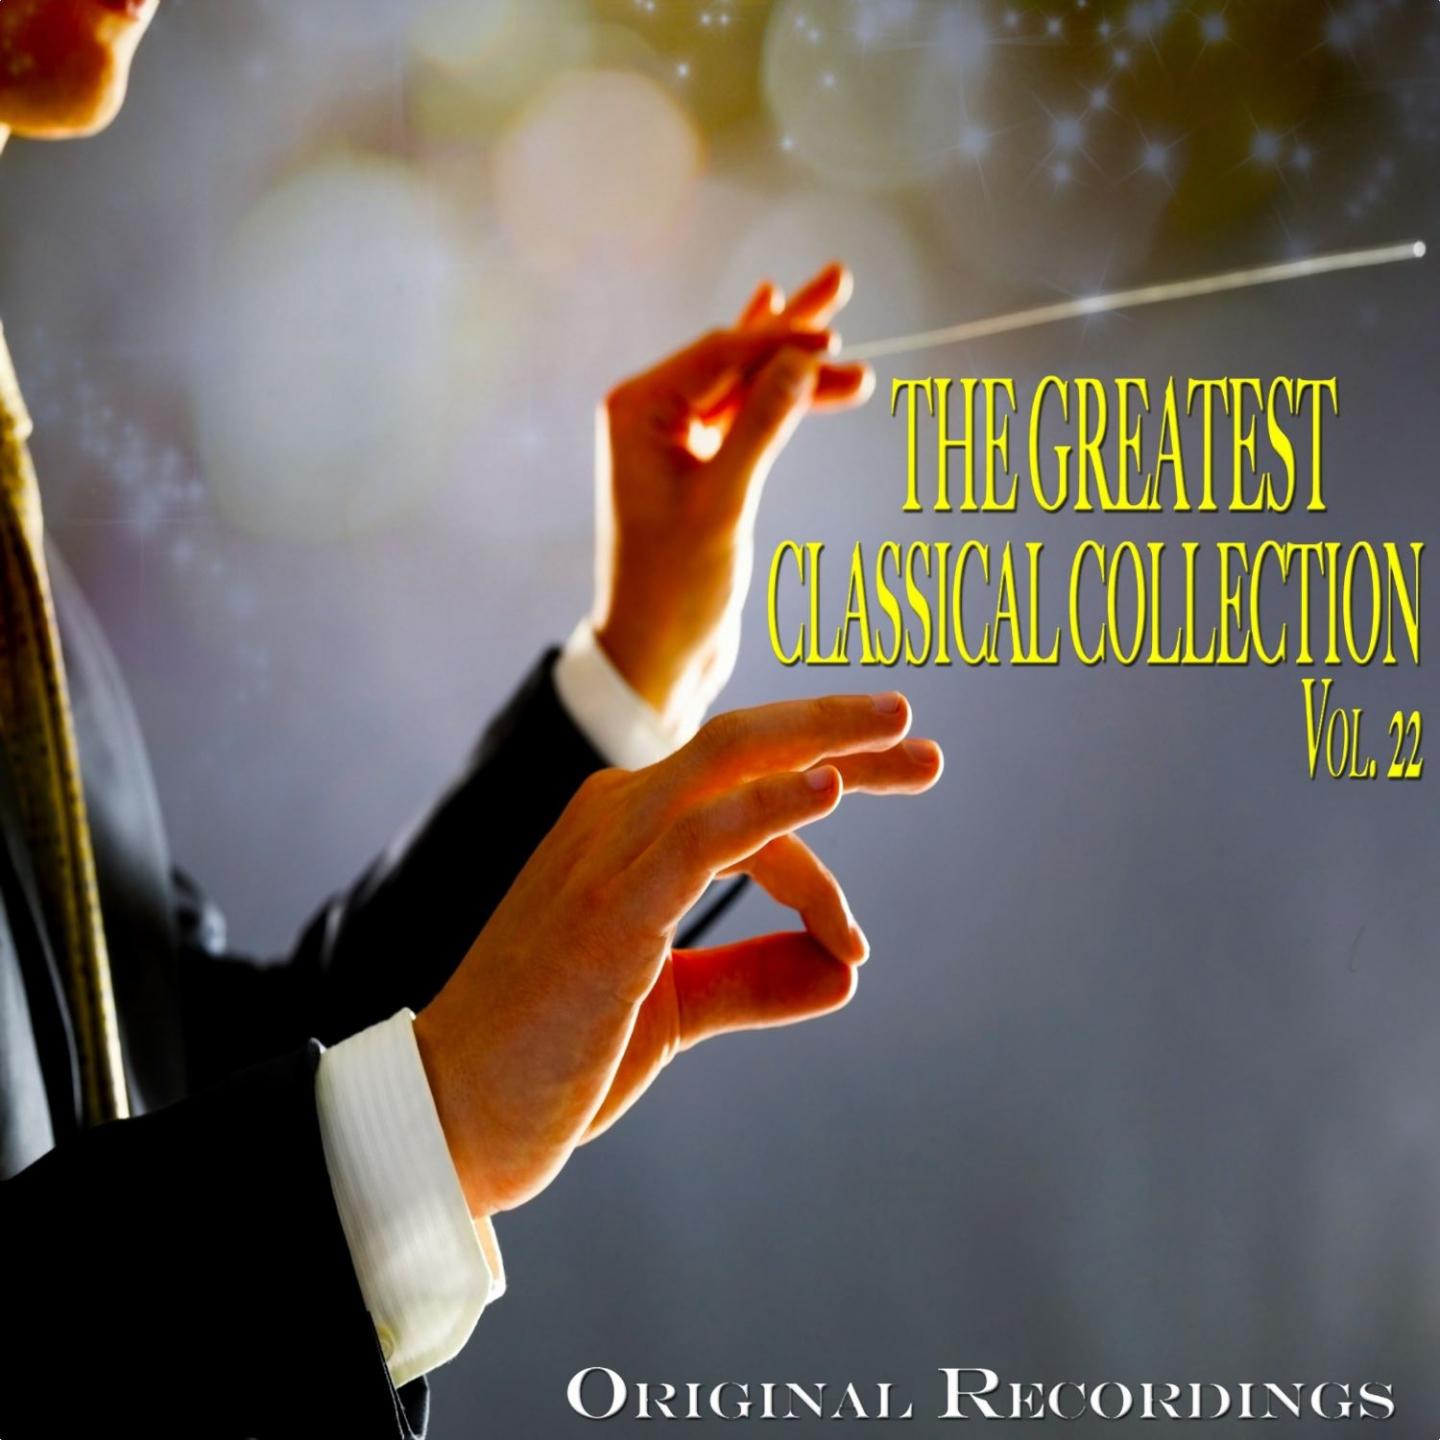 The Greatest Classical Collection Vol. 22